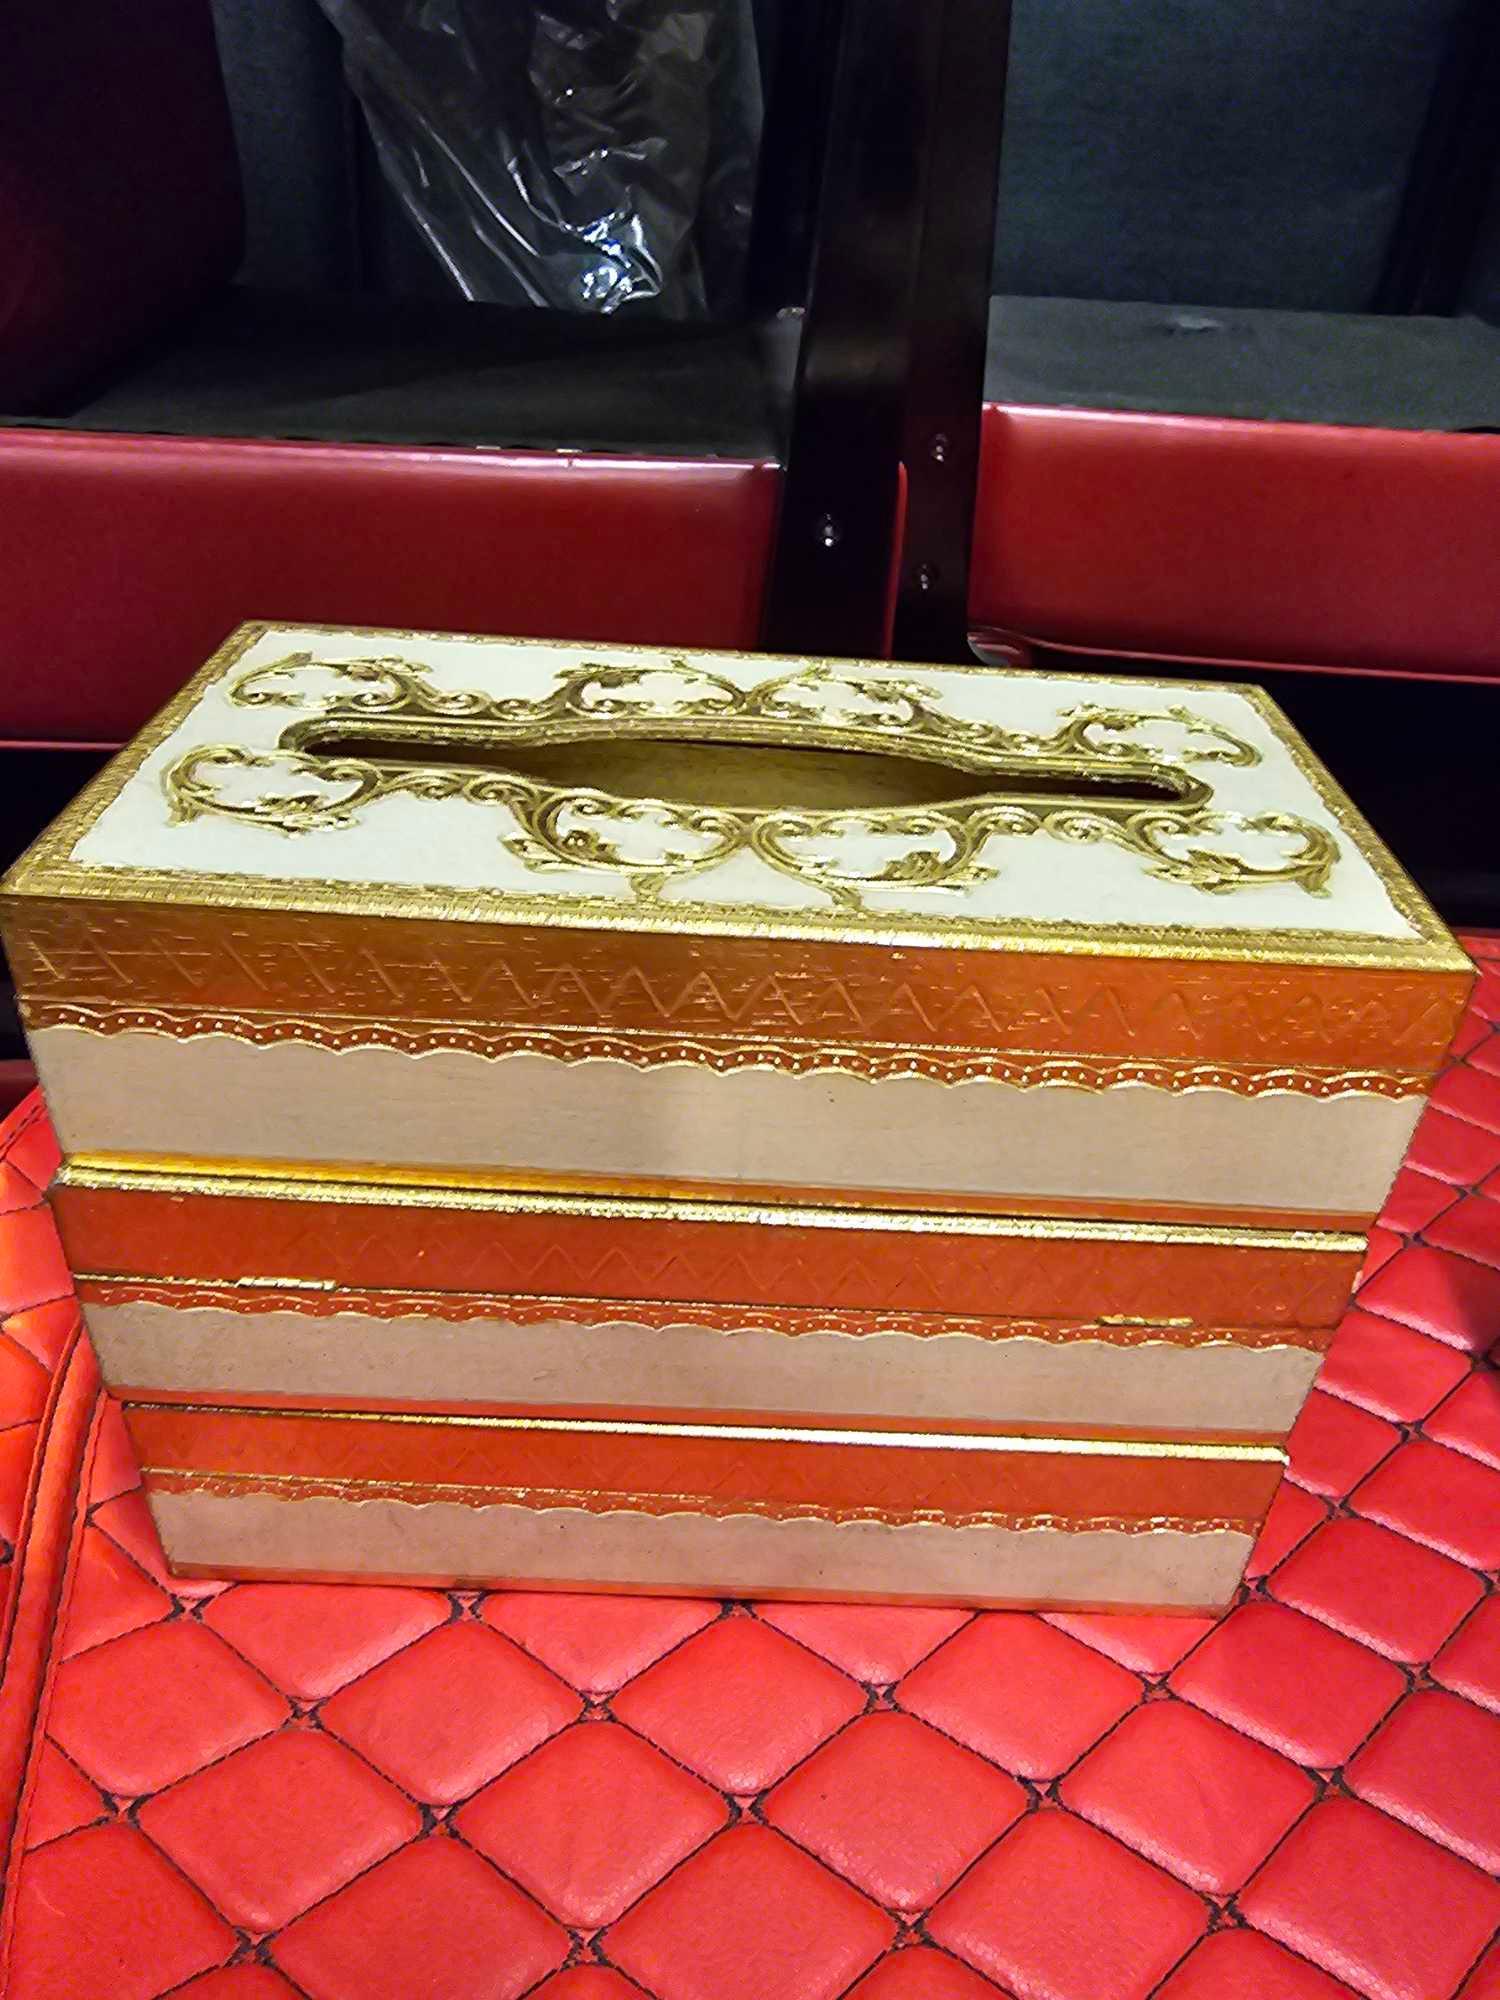 3 x Deluxe Vintage Hinged Tissue Box Cover With Gold Gilt Highlights Made In Italy 28cm - Image 2 of 3